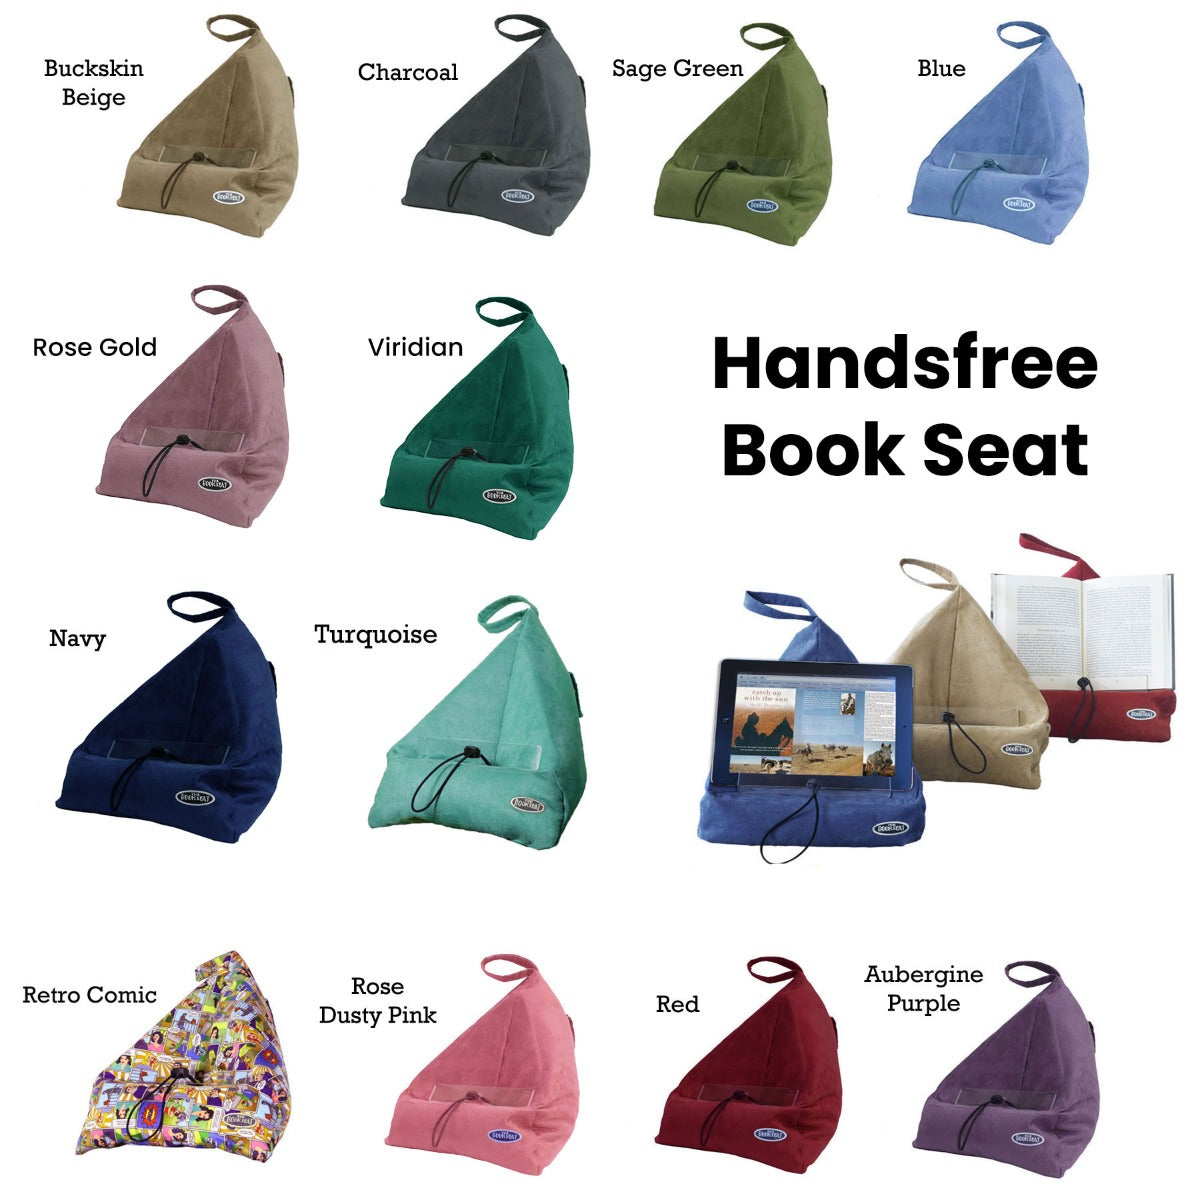 The Book Seat Handsfree Book Seat Rose Gold